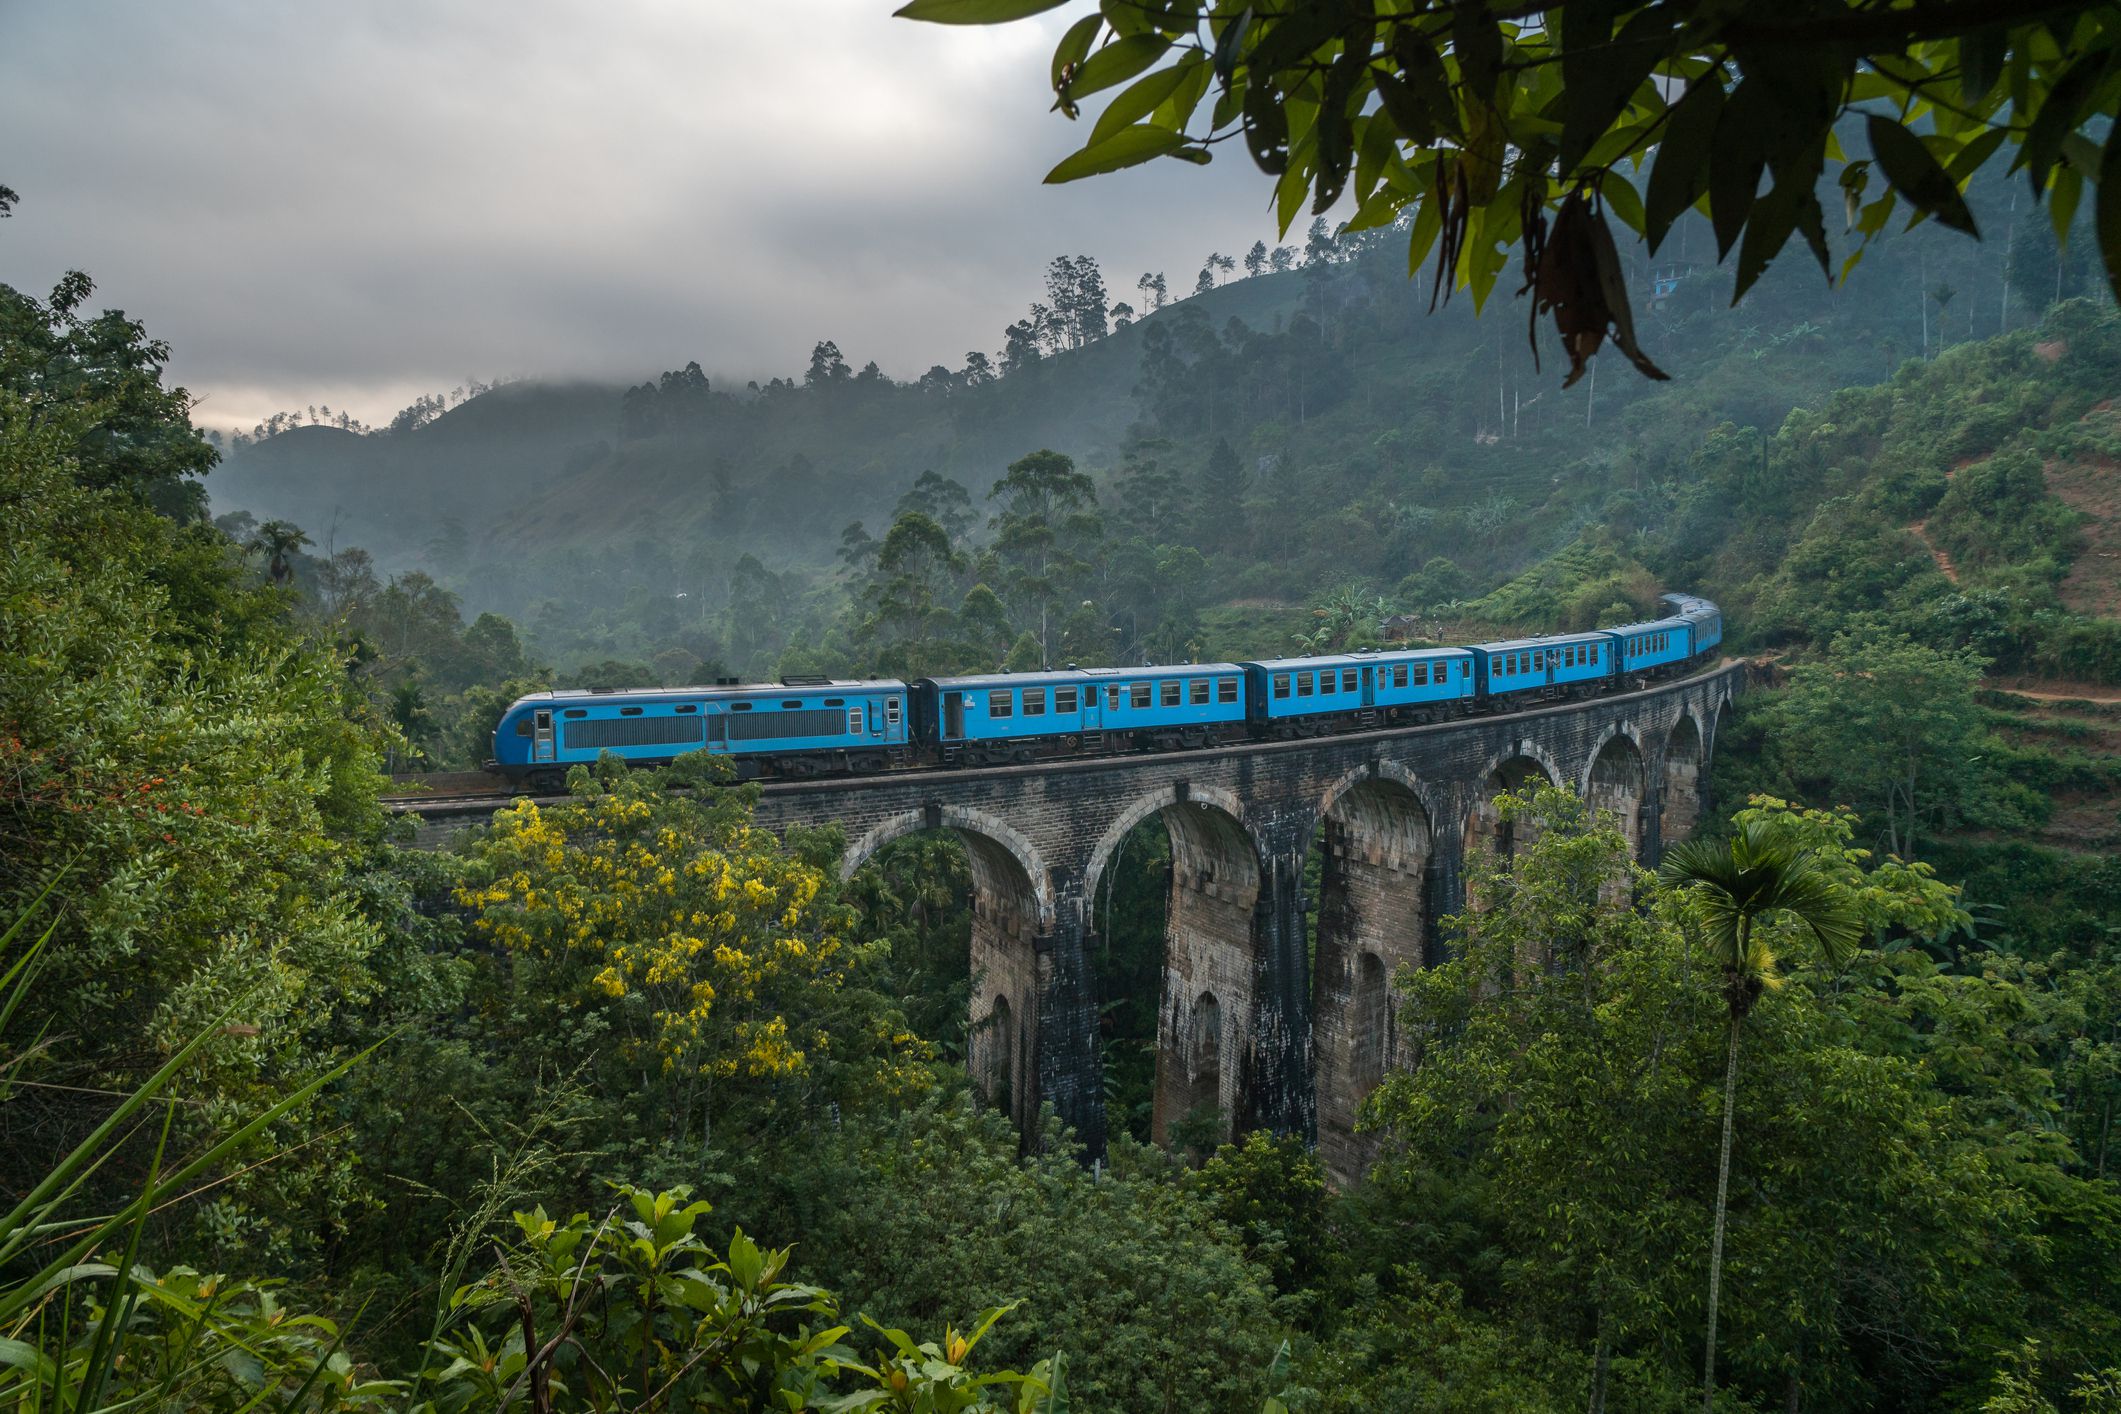 <p>If you’ve seen photos of passengers hanging out of a blue train surrounded by dense, green foliage, you’ve likely seen the Sri Lanka Railways journey from Kandy to Ella in Sri Lanka. </p><p>Although it may not be recommended to hang from objects moving at high speeds, you wouldn’t want to miss the views on this train ride between the central city of Kandy and the small southern town of Ella.</p><p>The ride takes about seven hours and offers views of tea plantations, green hills, bridges and villages. It’s recommended not to book first class tickets for your itinerary, as you won’t have the experience of mingling with the locals and having open windows.</p>